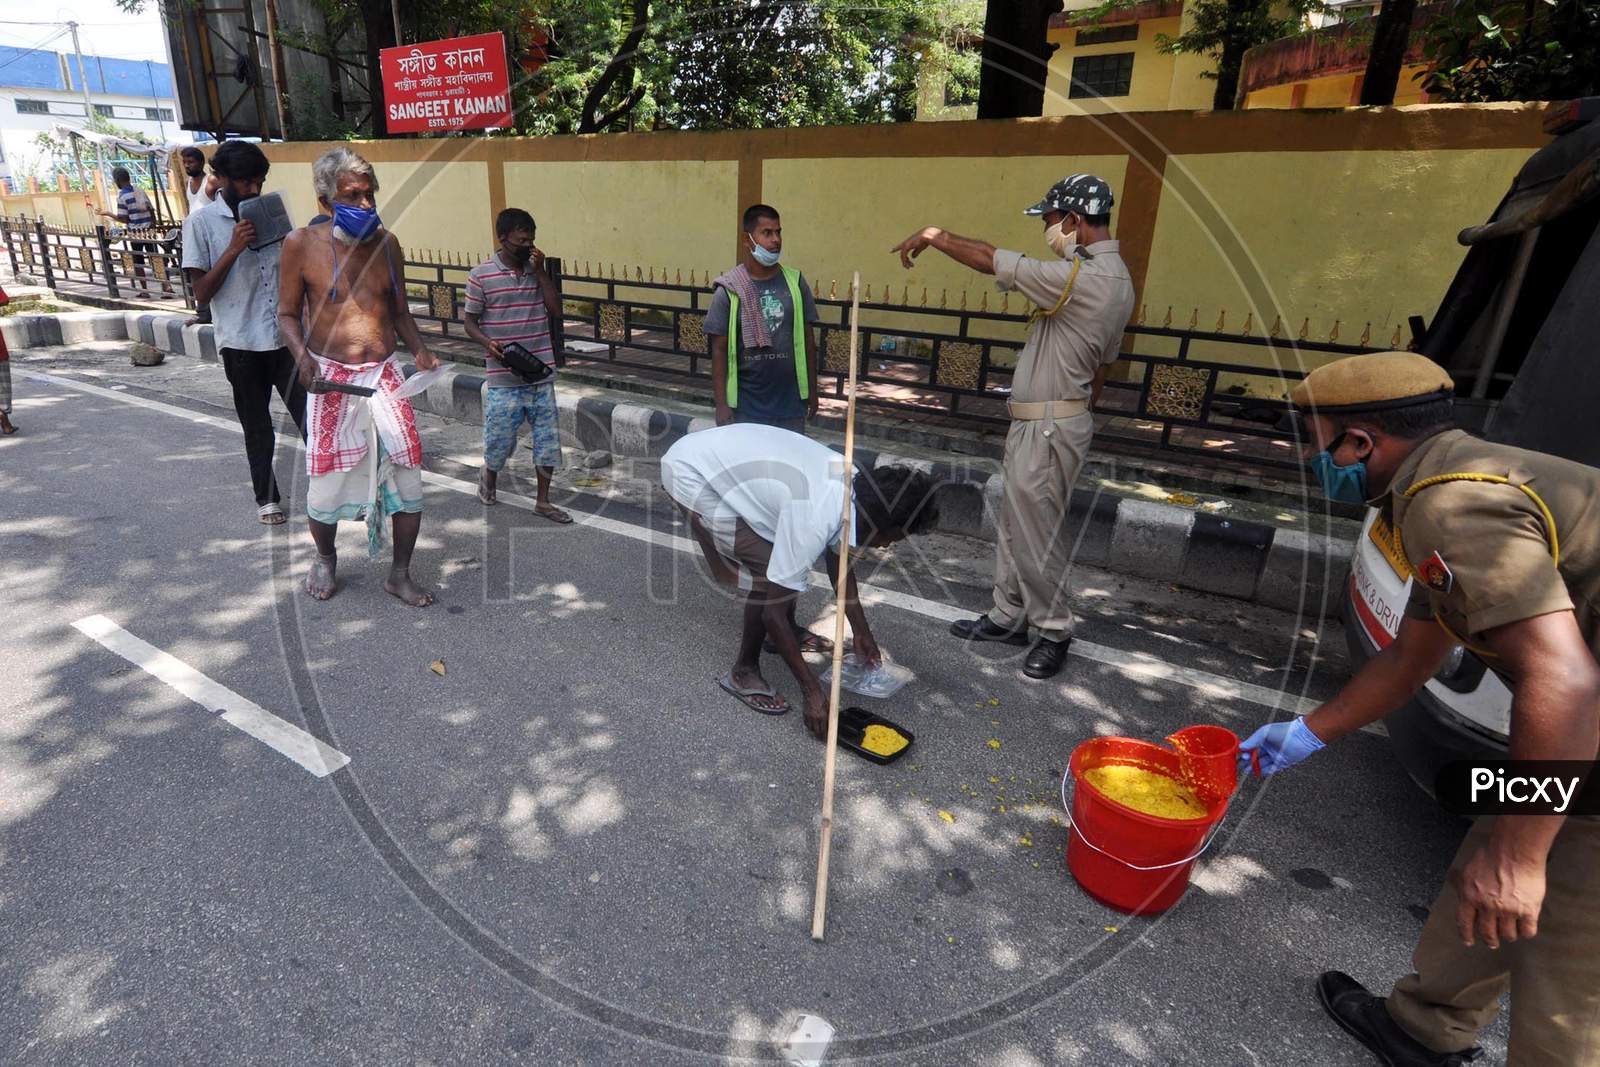 Police officers distribute food to people during the lockdown imposed by the Assam government to control the spread of coronavirus in Guwahati, Assam on July 04, 2020